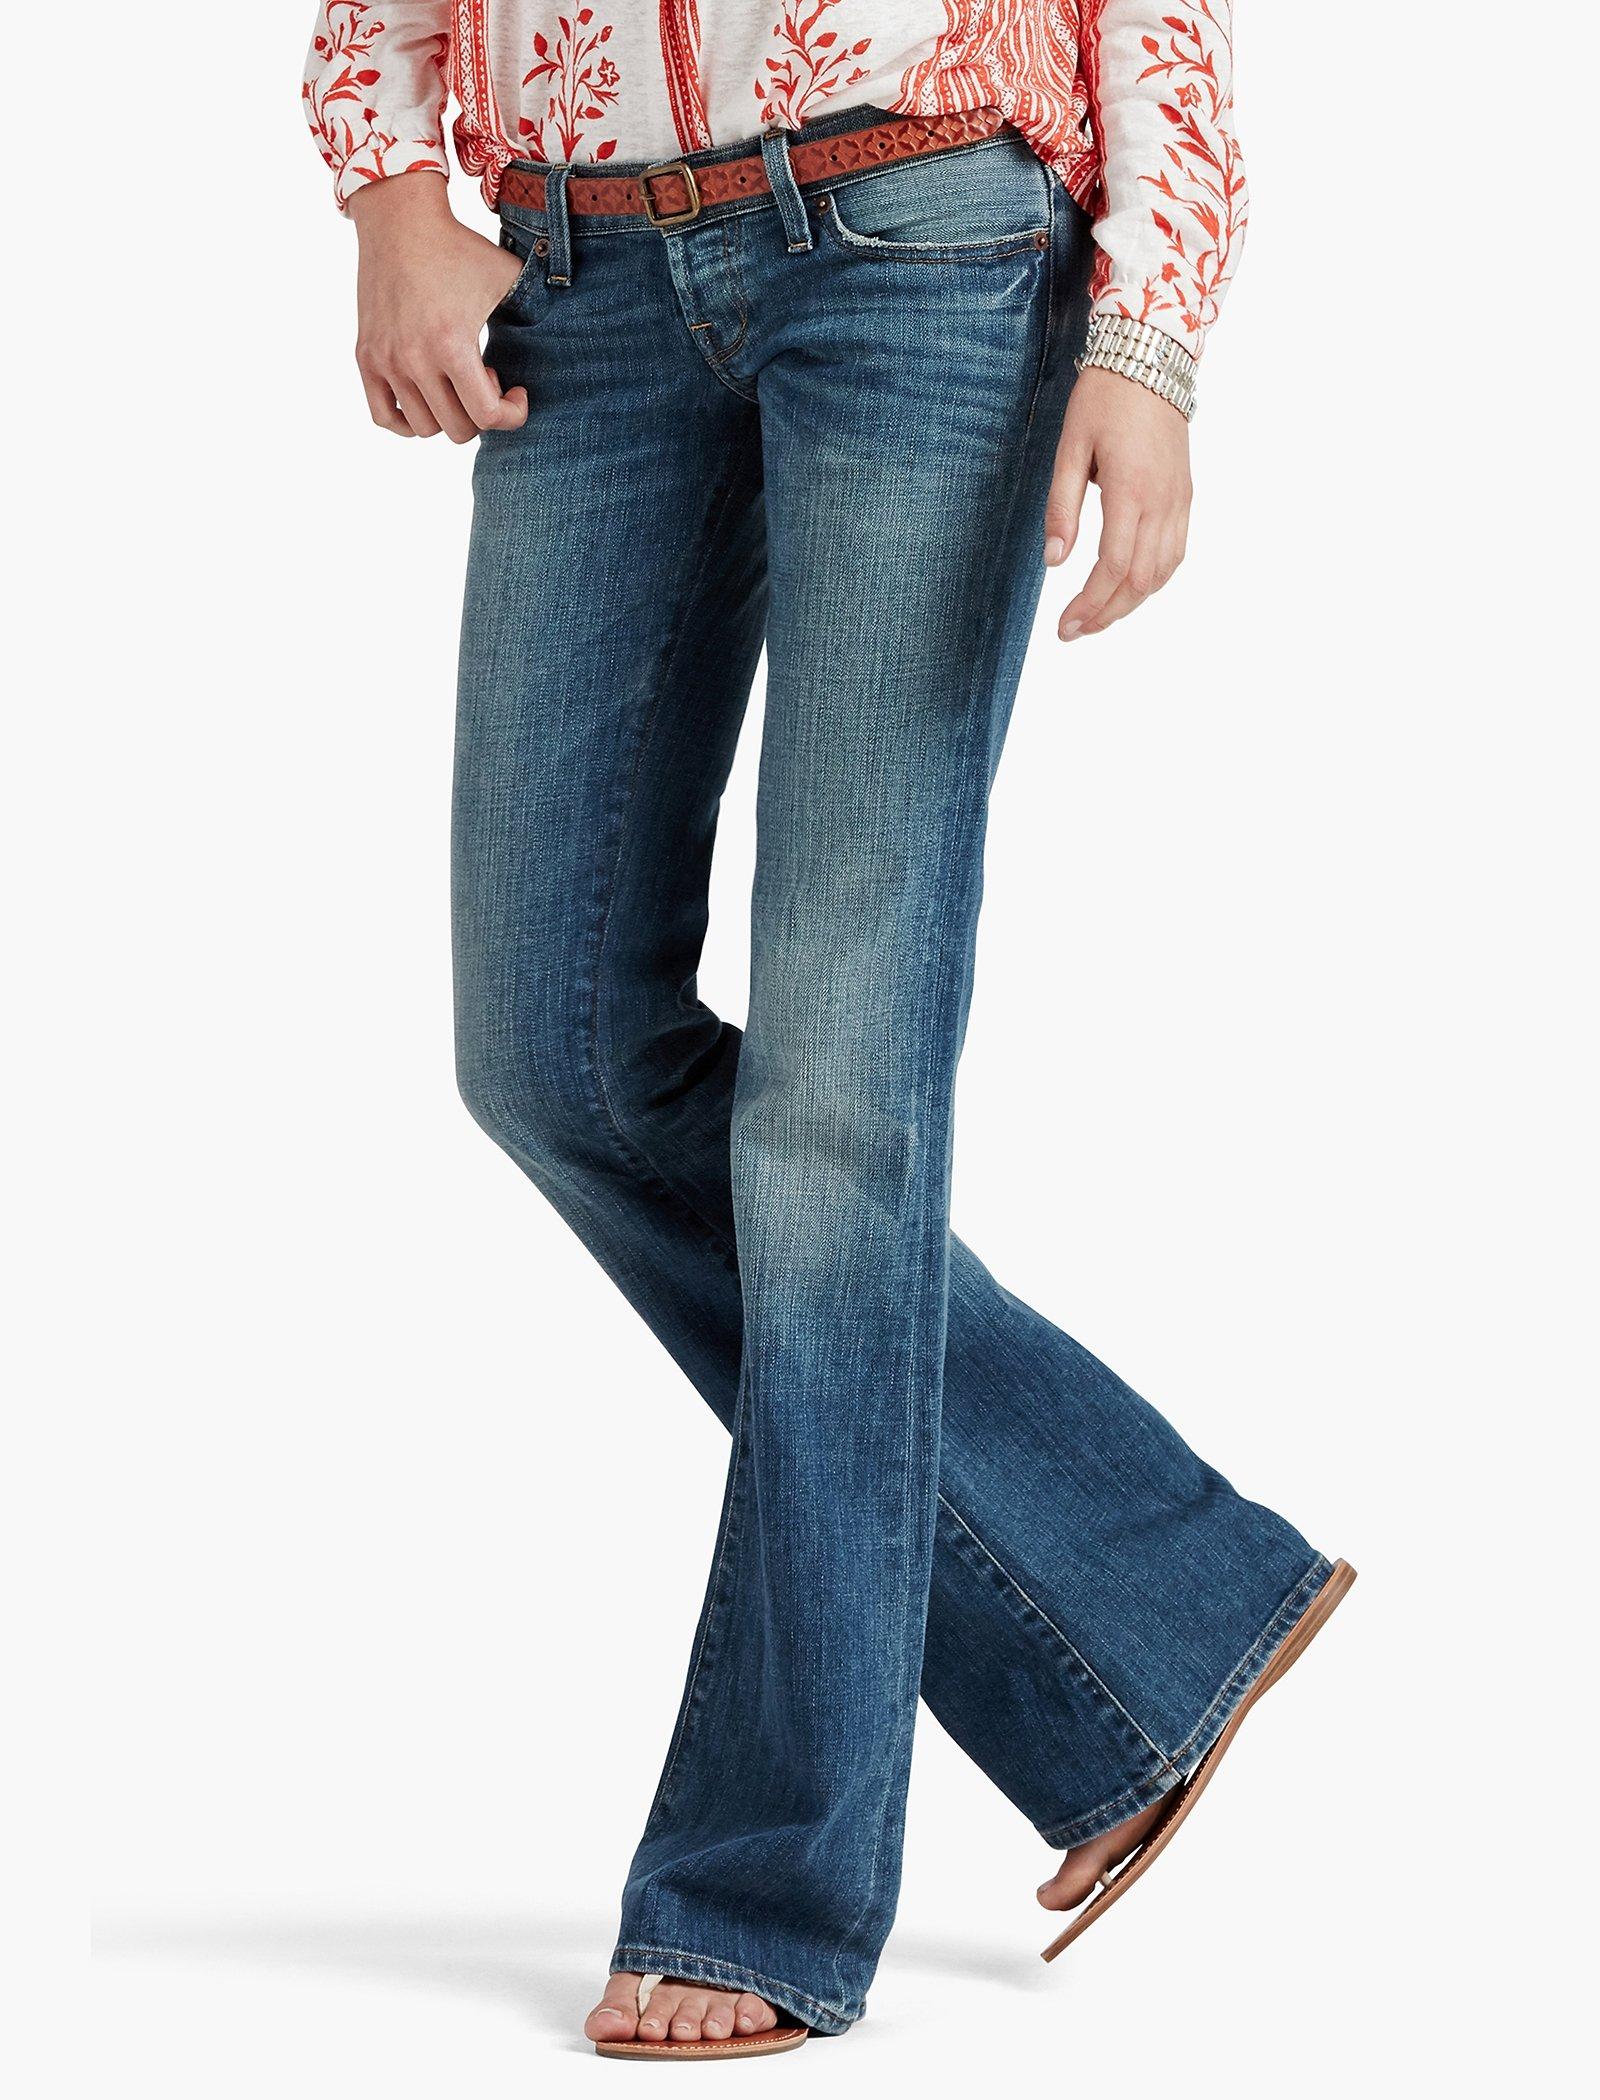 crown and ivy girlfriend jeans